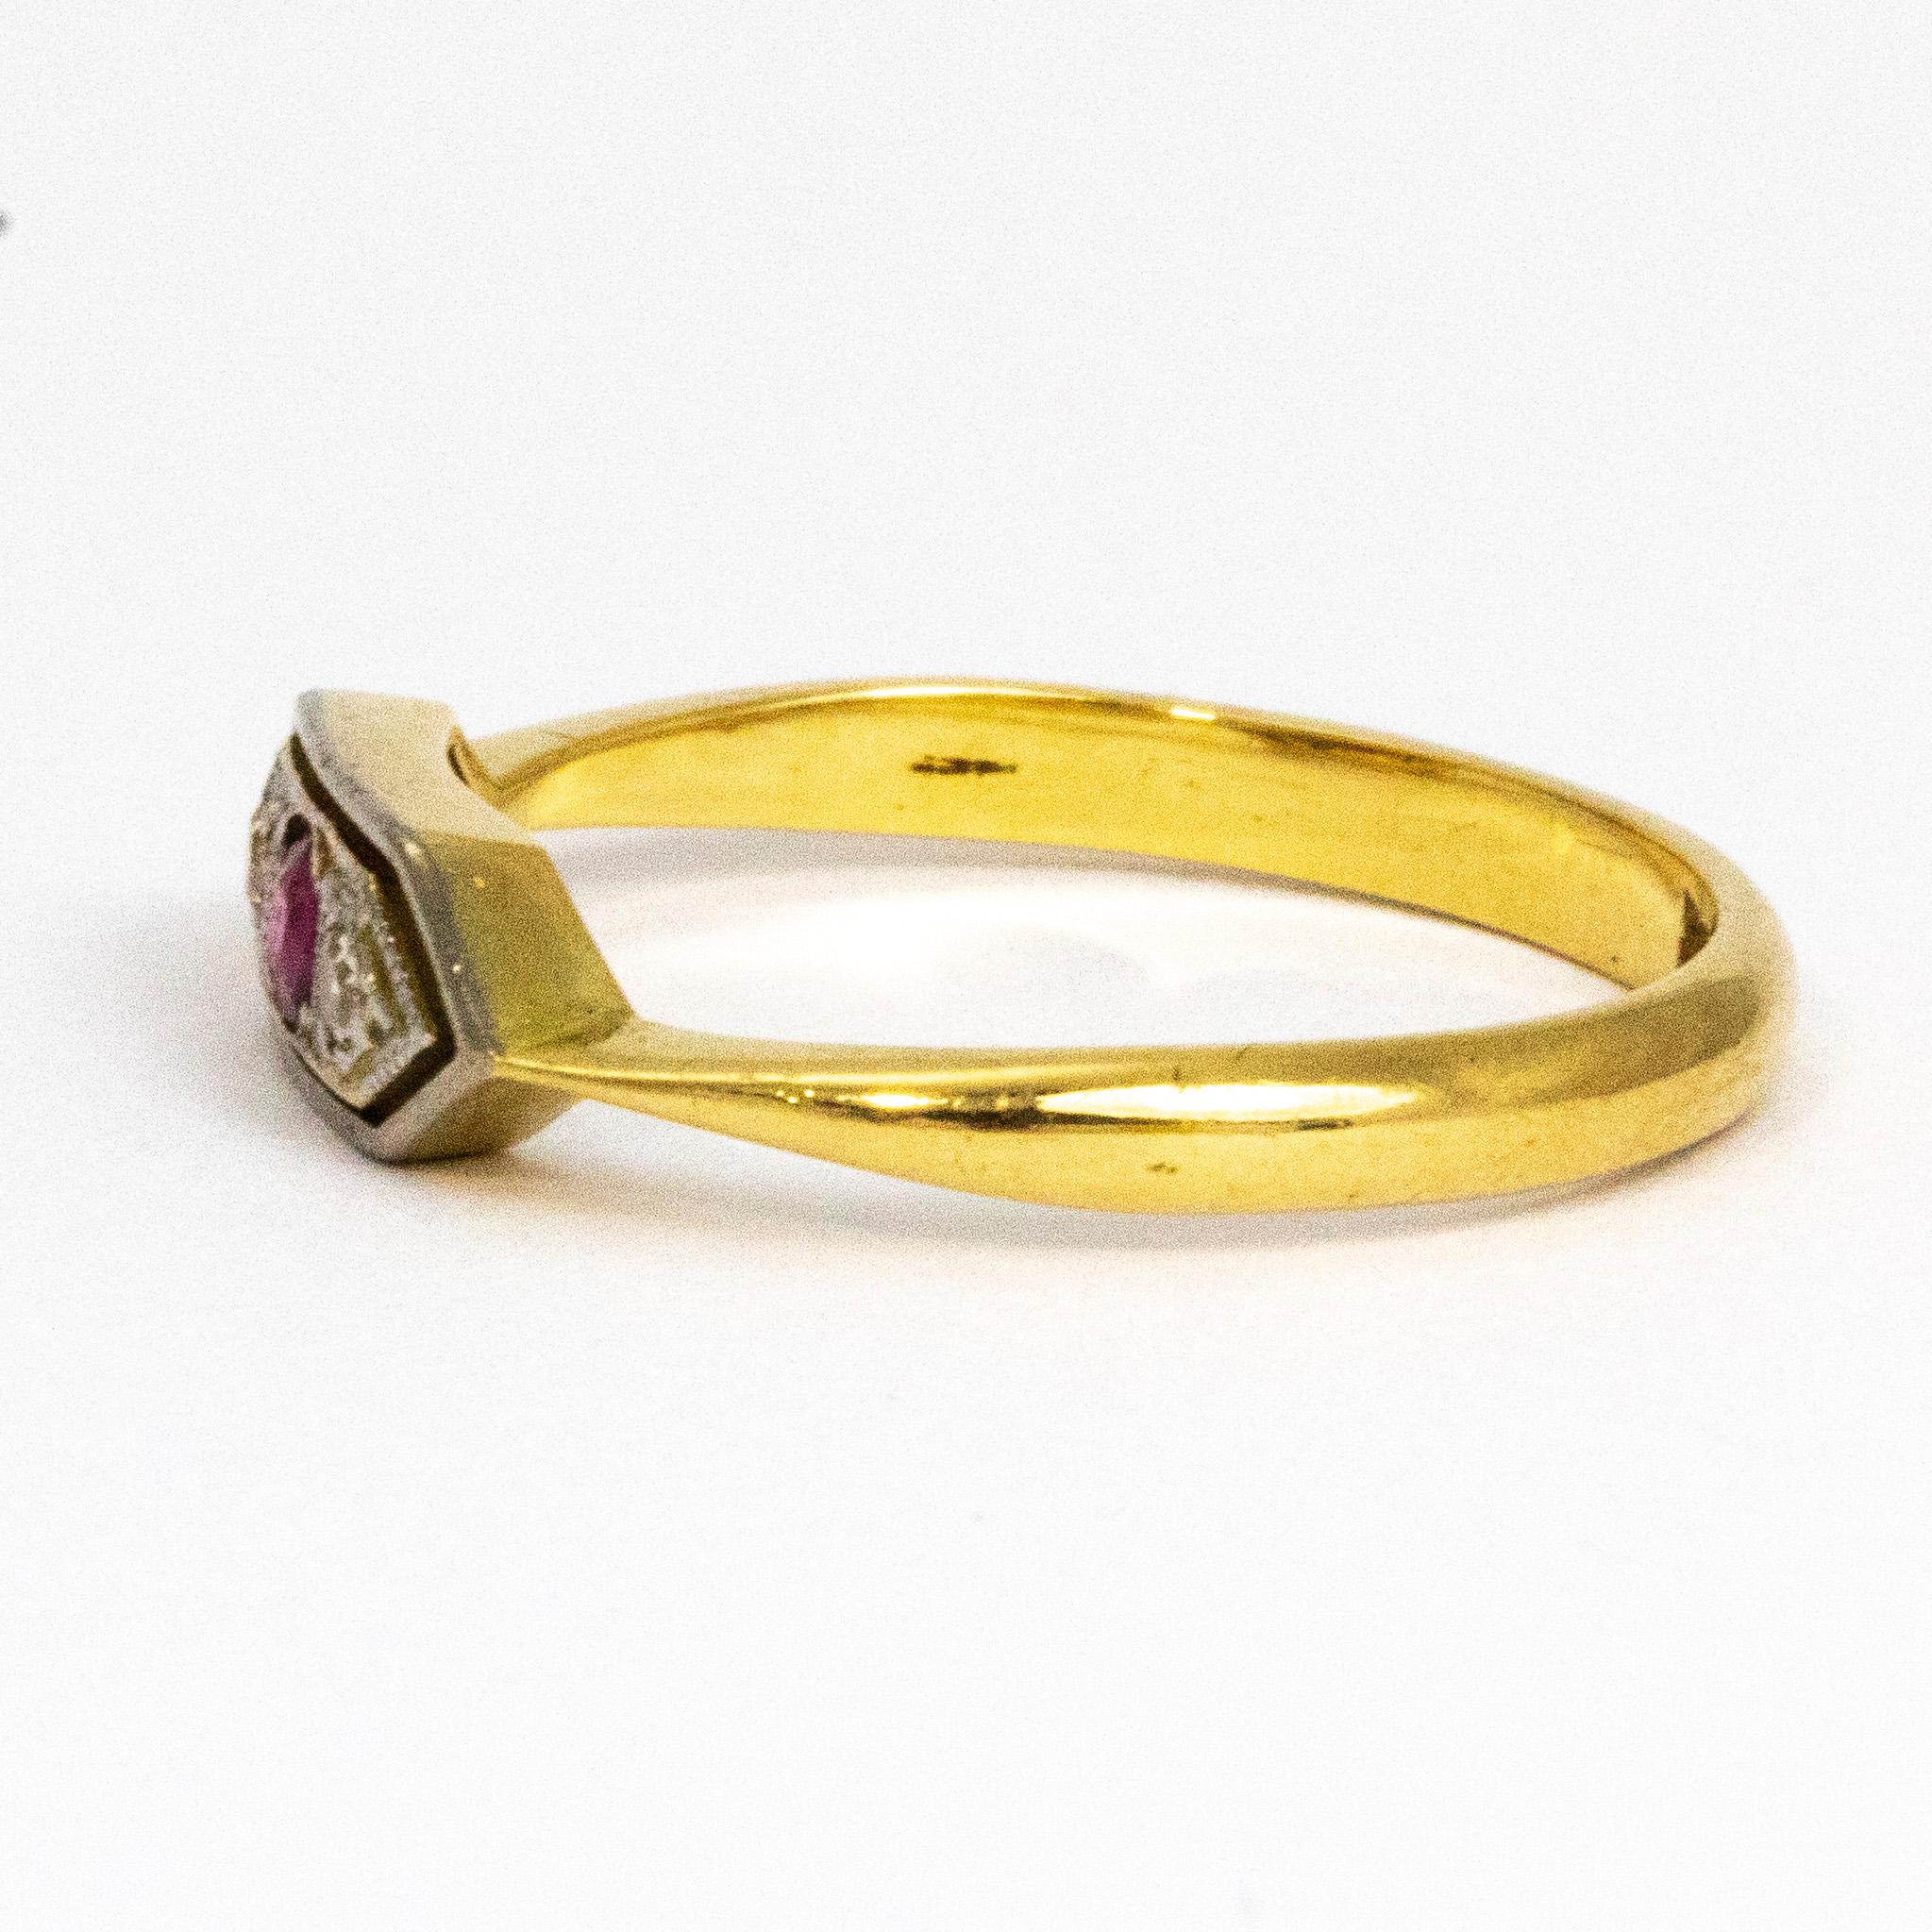 This gorgeous ruby and diamond beauty boasts a 7pt ruby and two 3pt diamonds that are set in platinum. The setting is classically deco style with wonderful line details and crisp edges. The band is modelled out of 18ct gold and is hallmarked.

Ring